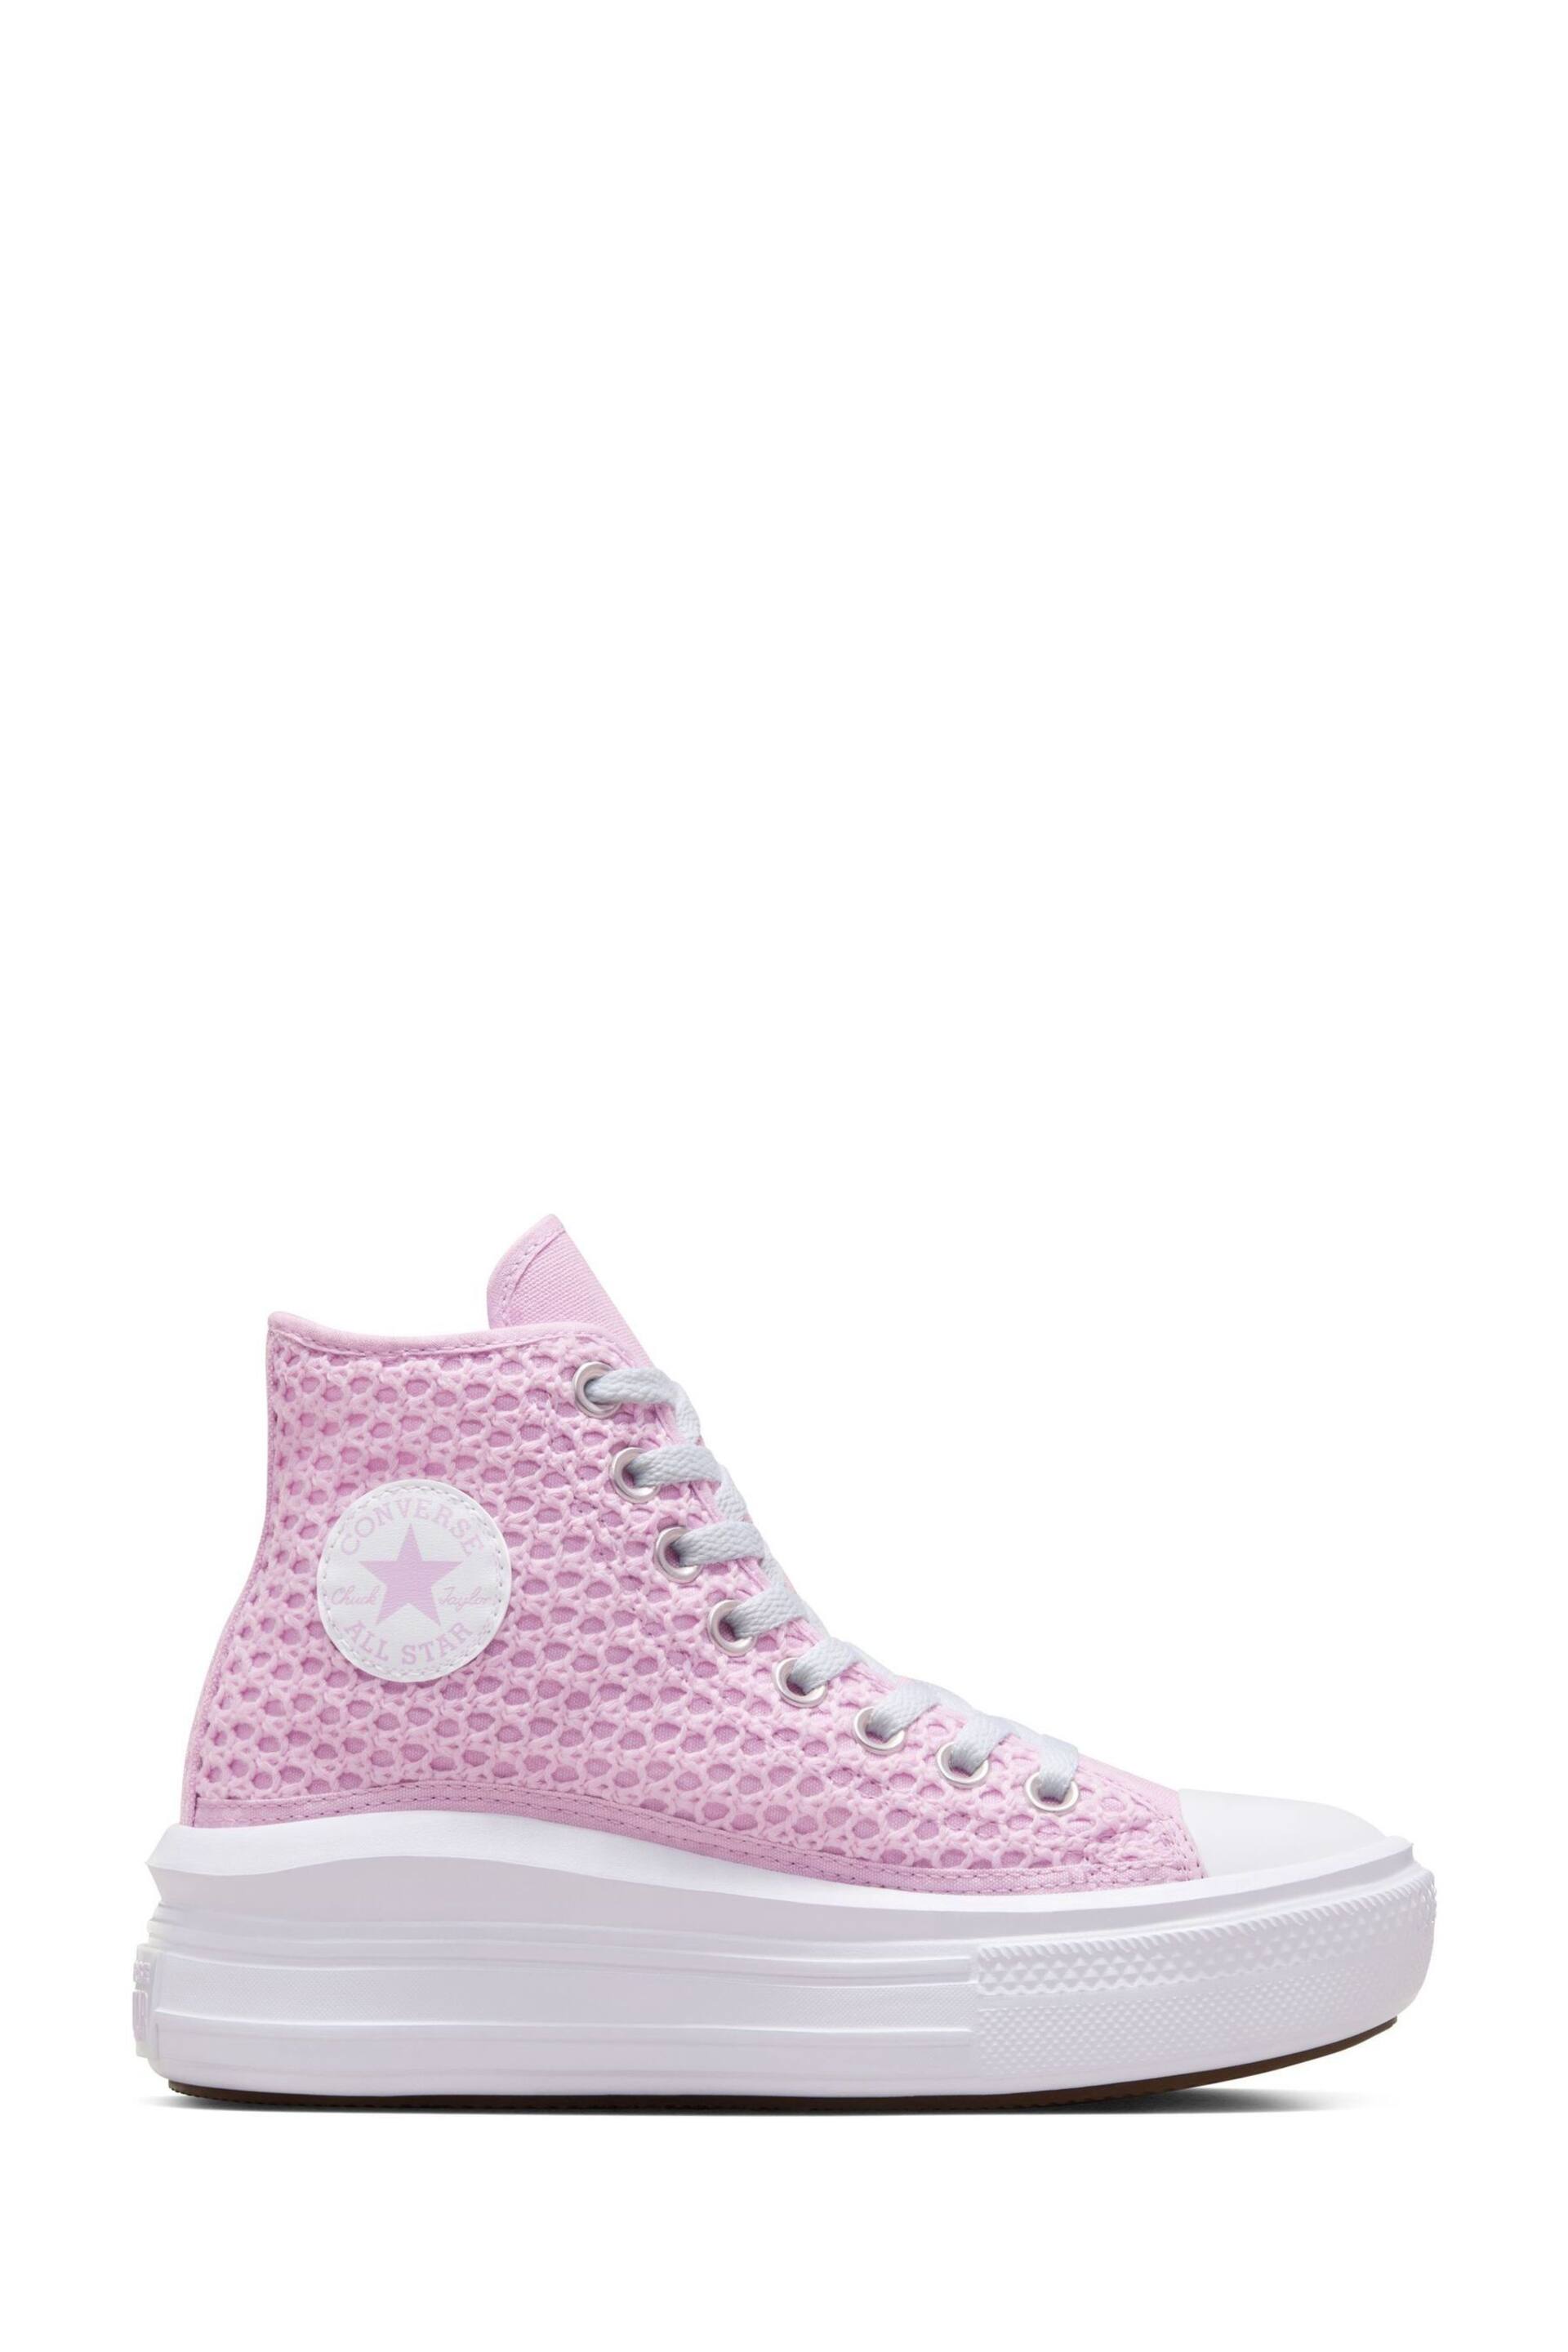 Converse Pink Chuck Taylor Crochet Move Youth Trainers - Image 1 of 8